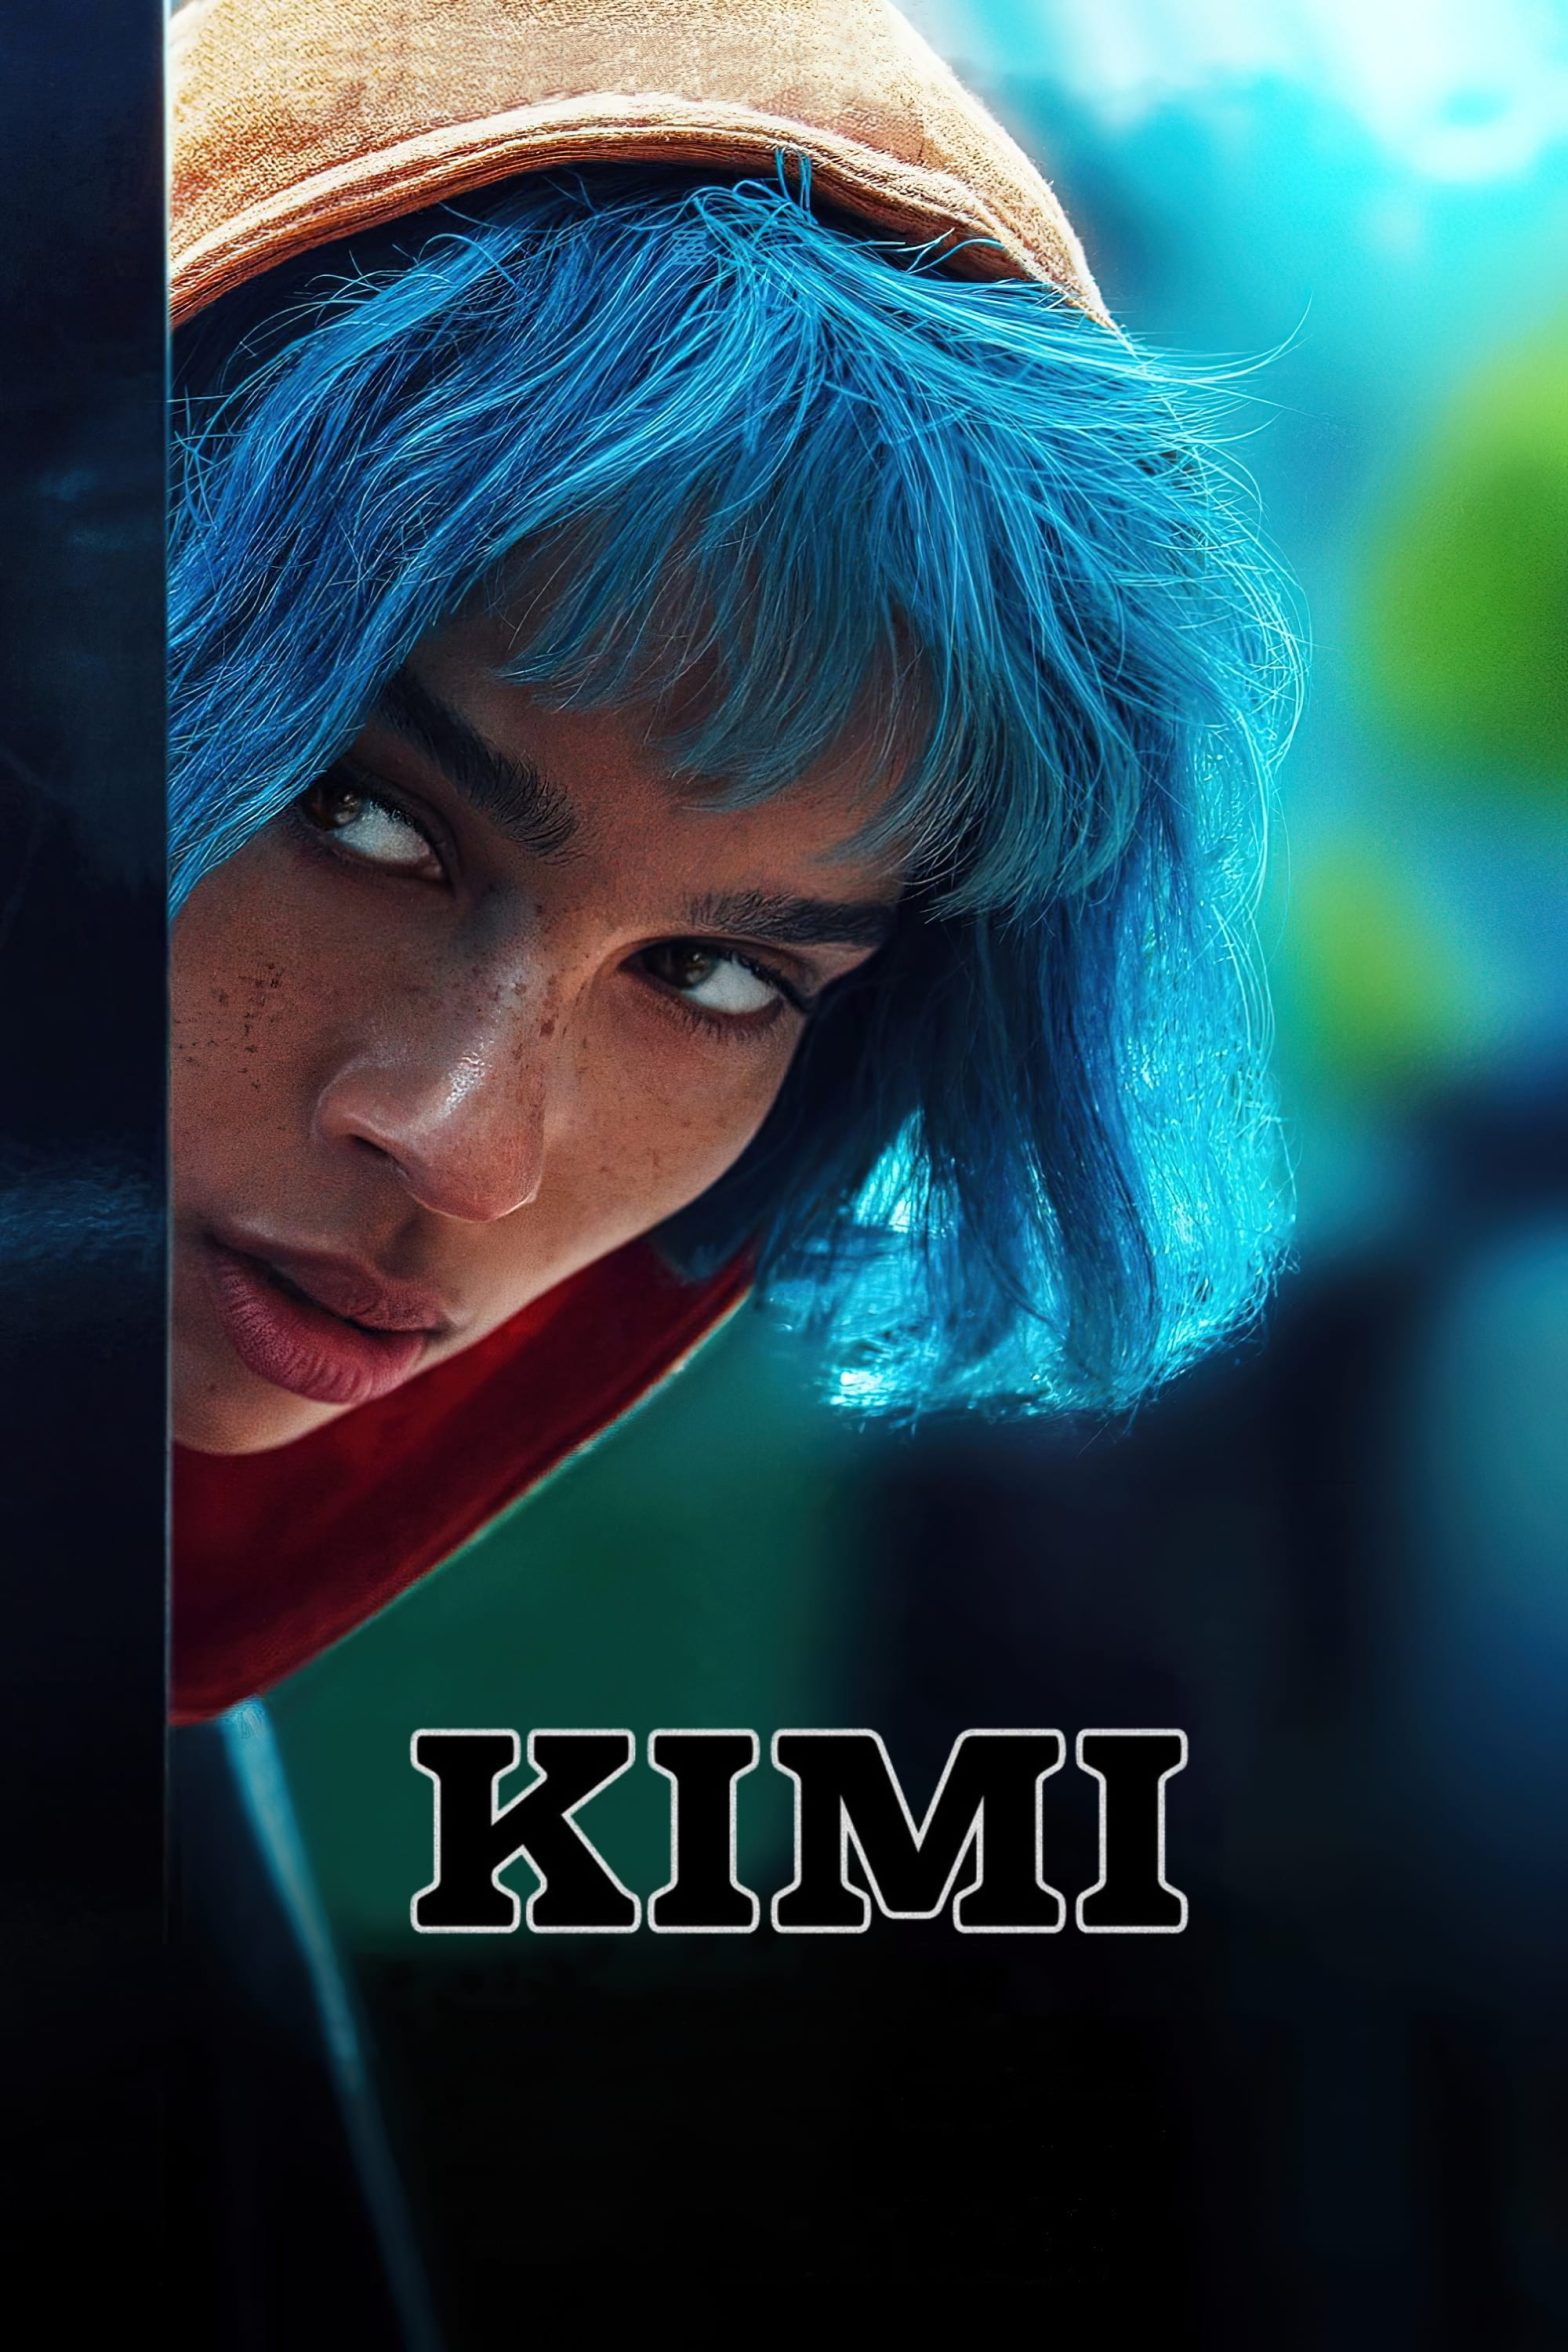 Poster for the movie "Kimi"